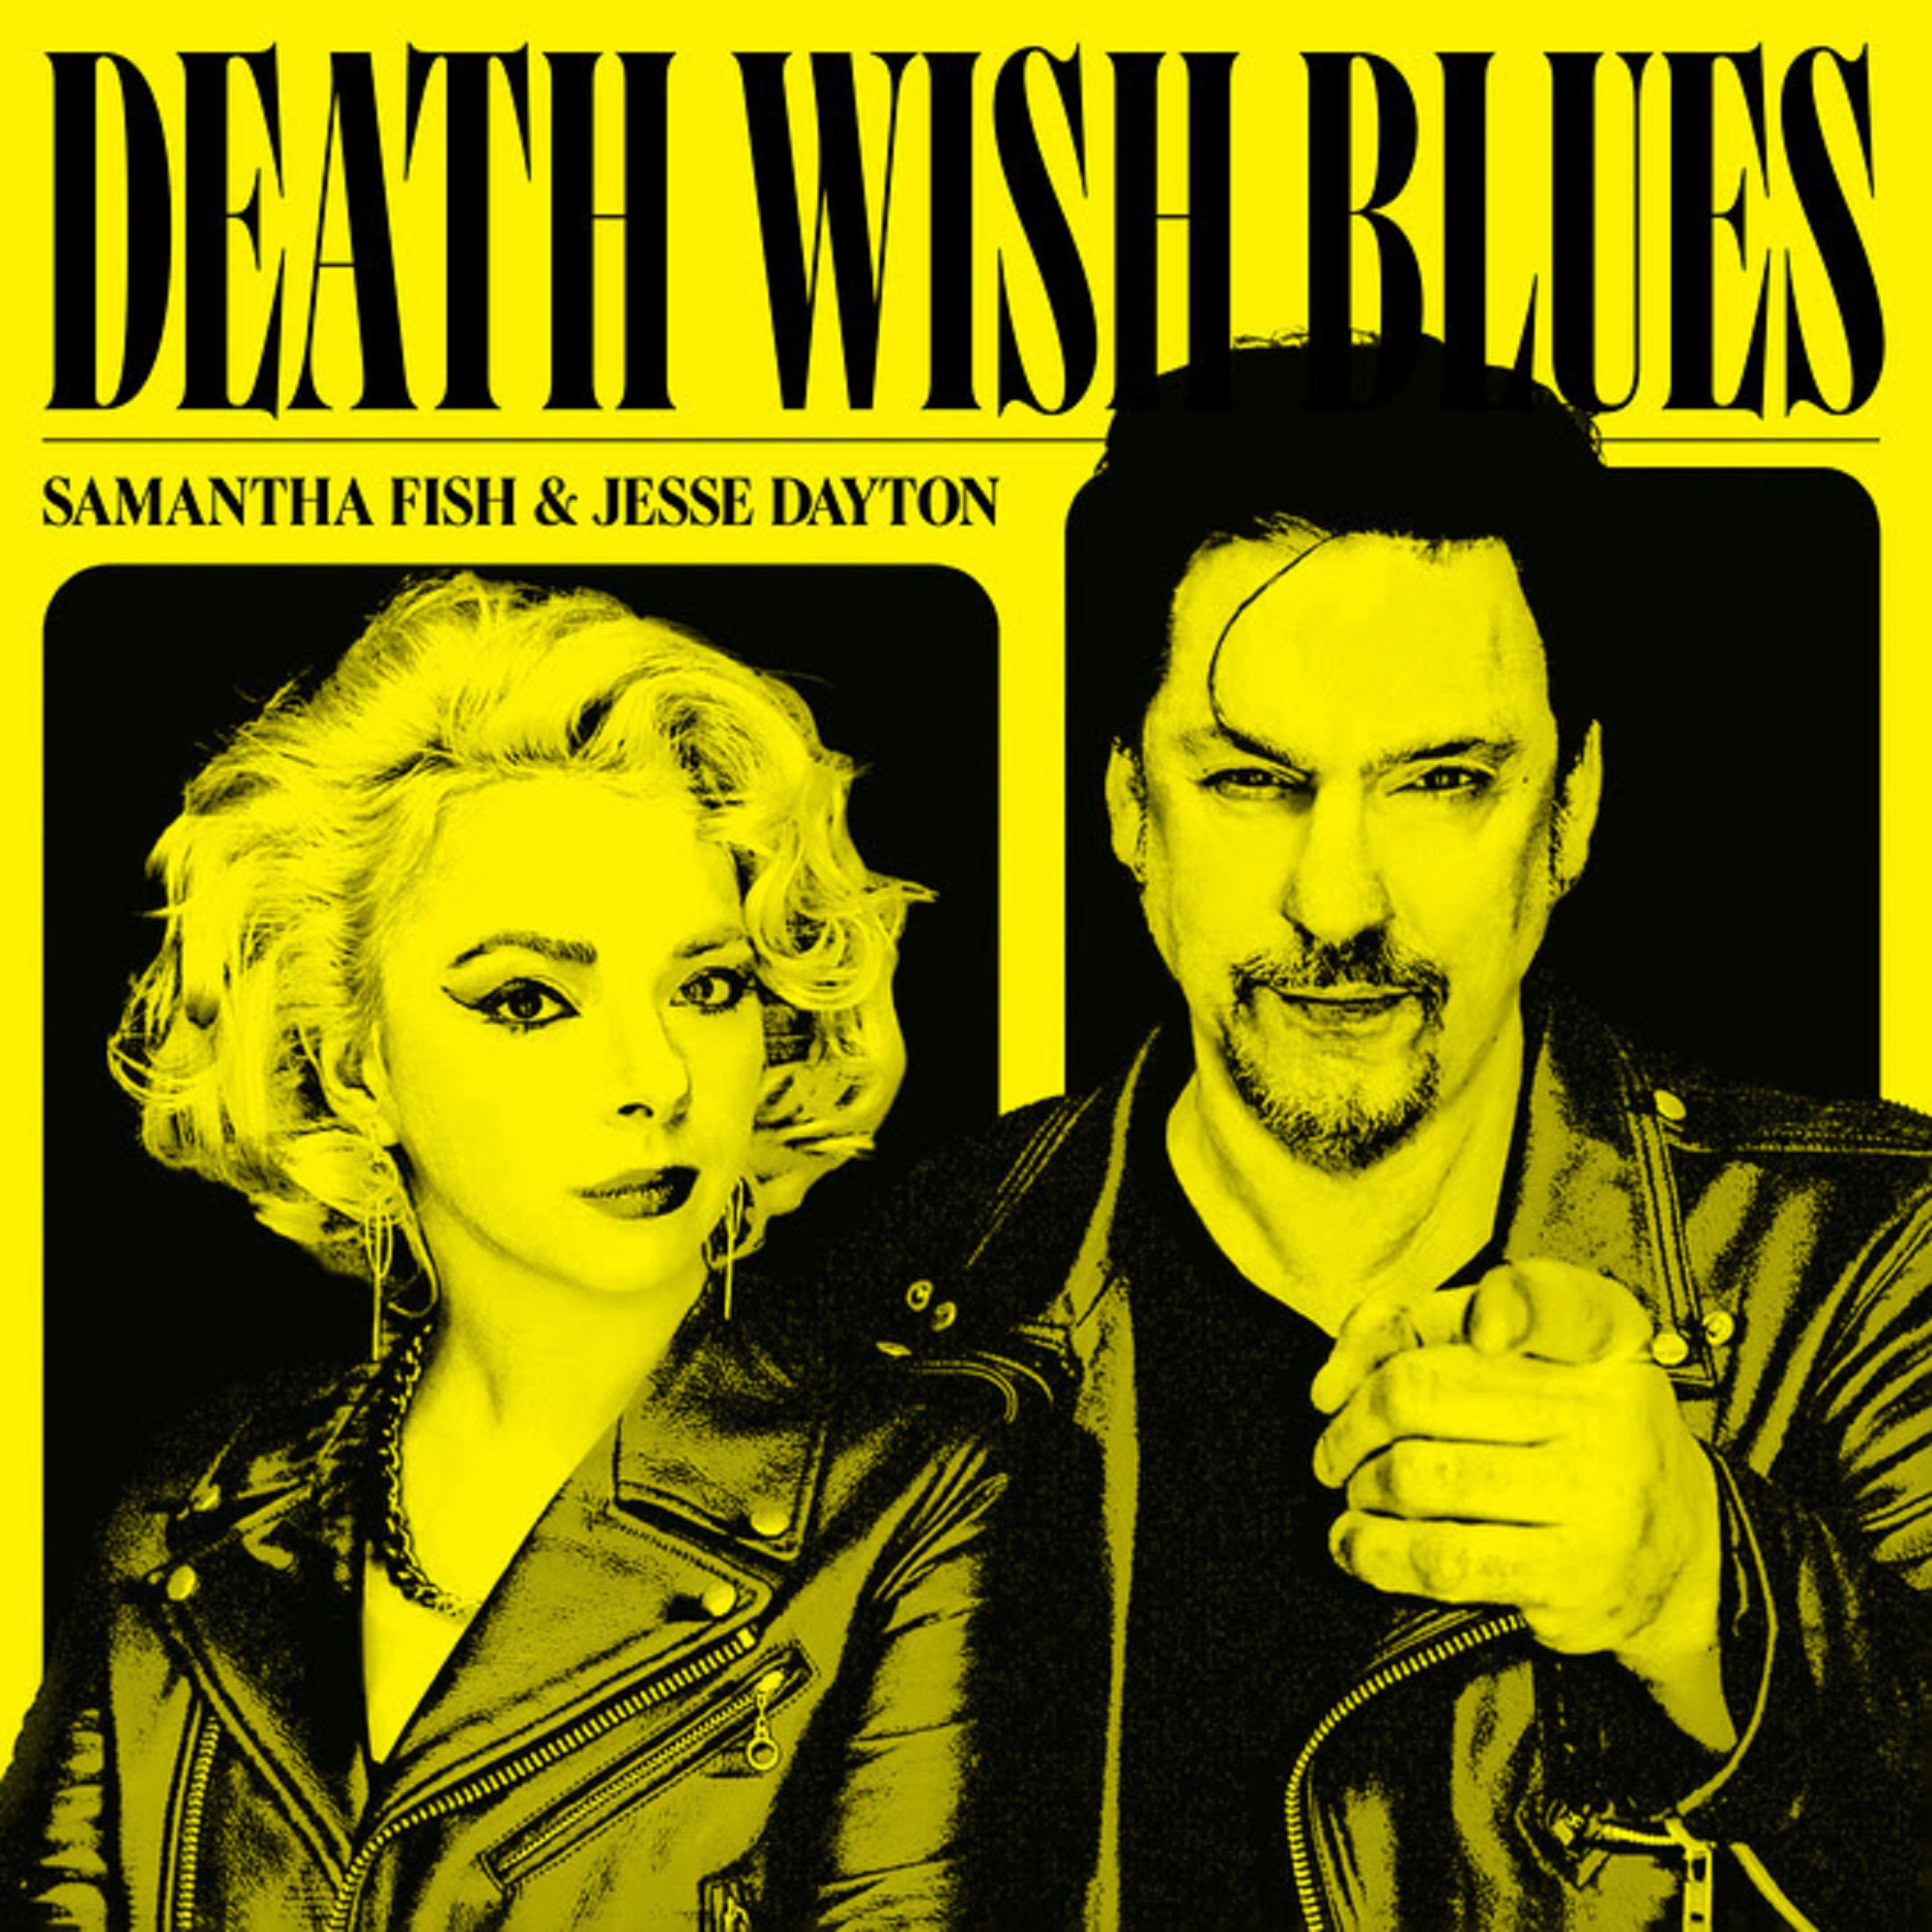 Samantha Fish & Jesse Dayton Trade Fiery Vocals on Blazing New Track "Riders" From Album DEATH WISH BLUES out May 19